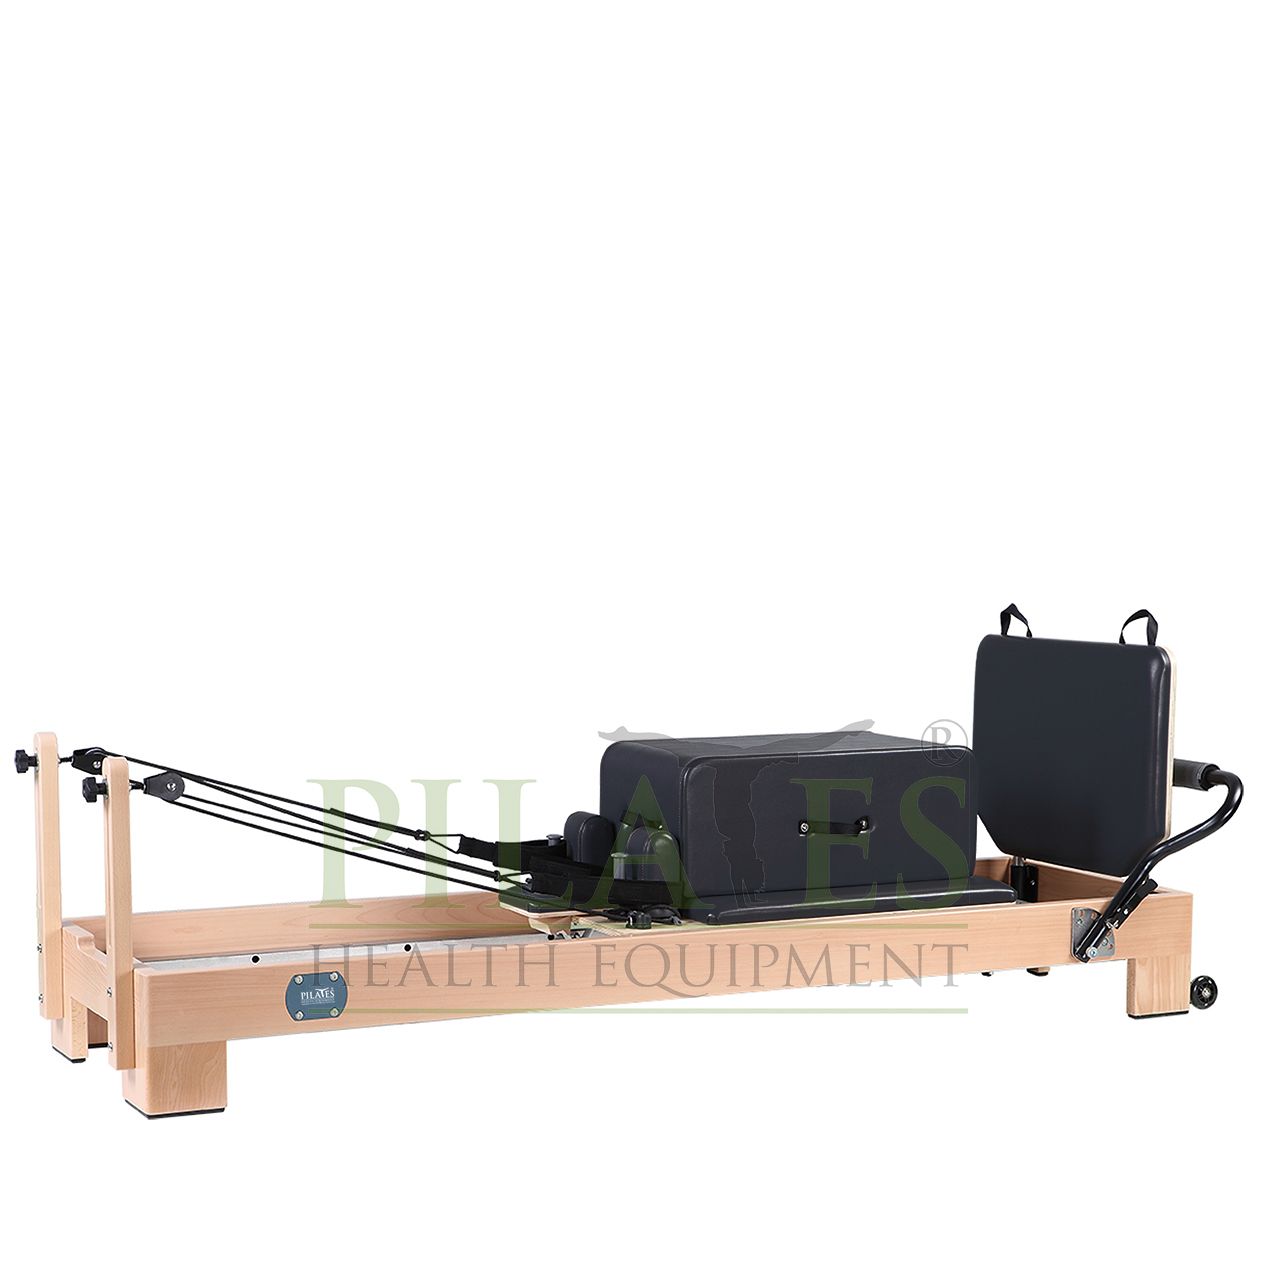 Blog - BASI Systems - Finely Crafted Pilates Equipment